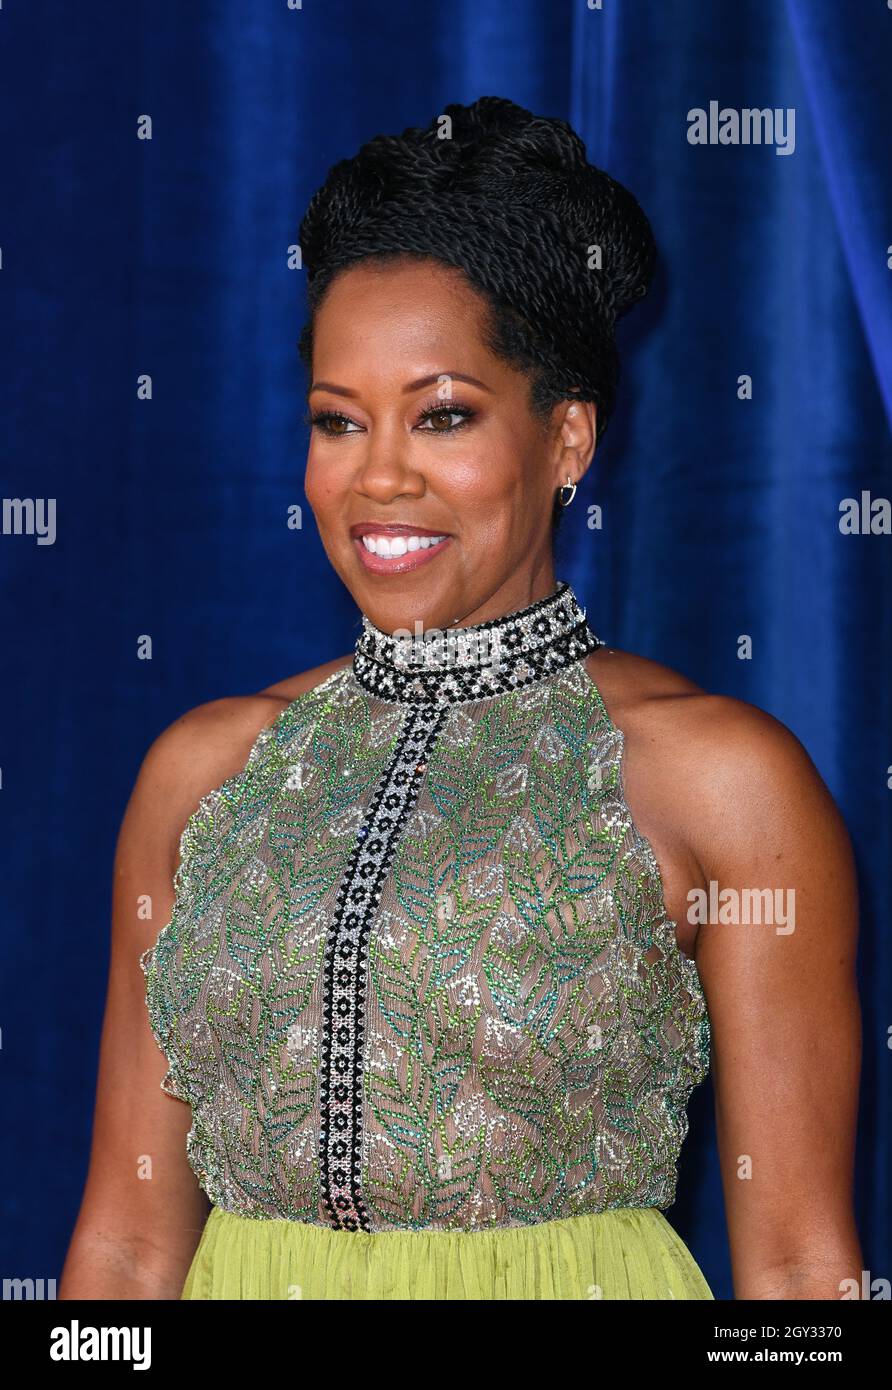 London, UK. October 6th, 2021, London, UK Regina King arriving at The Harder They Fall World Premiere, the opening night film of the BFI London Film Festival, held at The Royal Festival Hall. Credit: Doug Peters/EMPICS Stock Photo